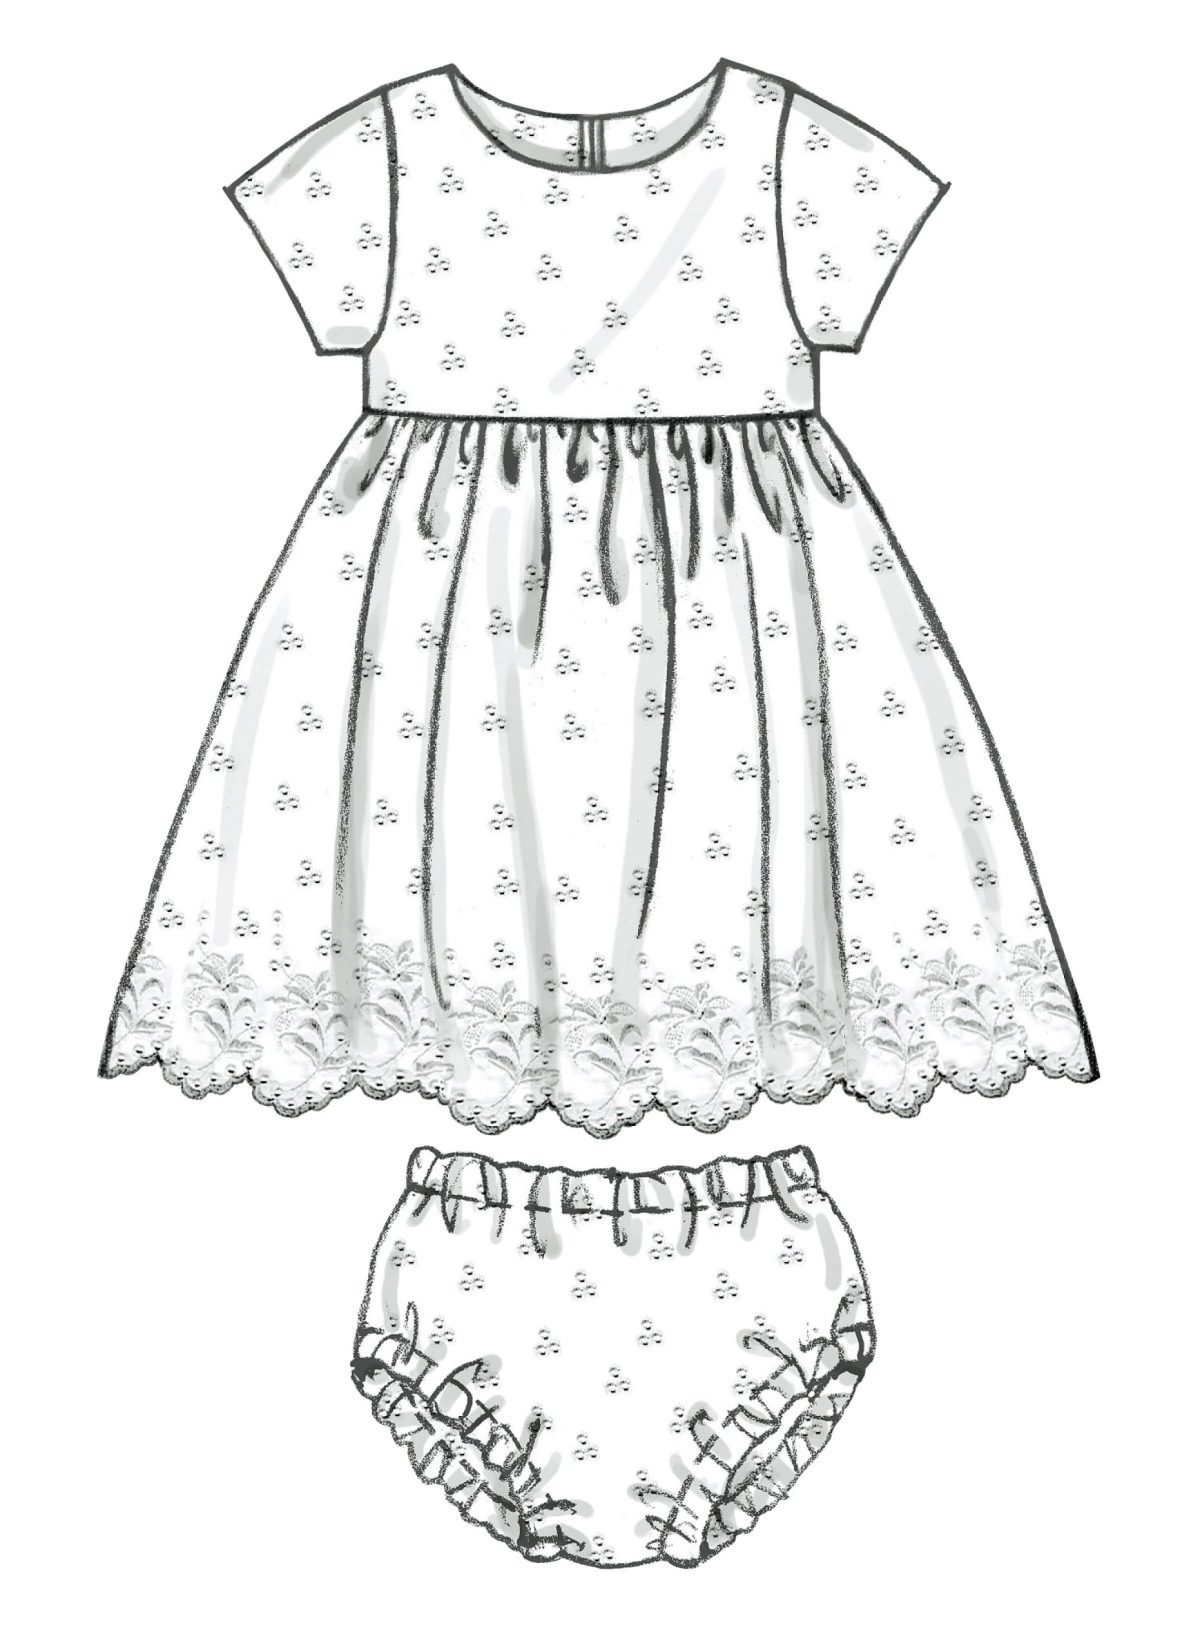 McCall's Sewing Pattern M6015 Infants' Lined Dresses, Panties And Headband